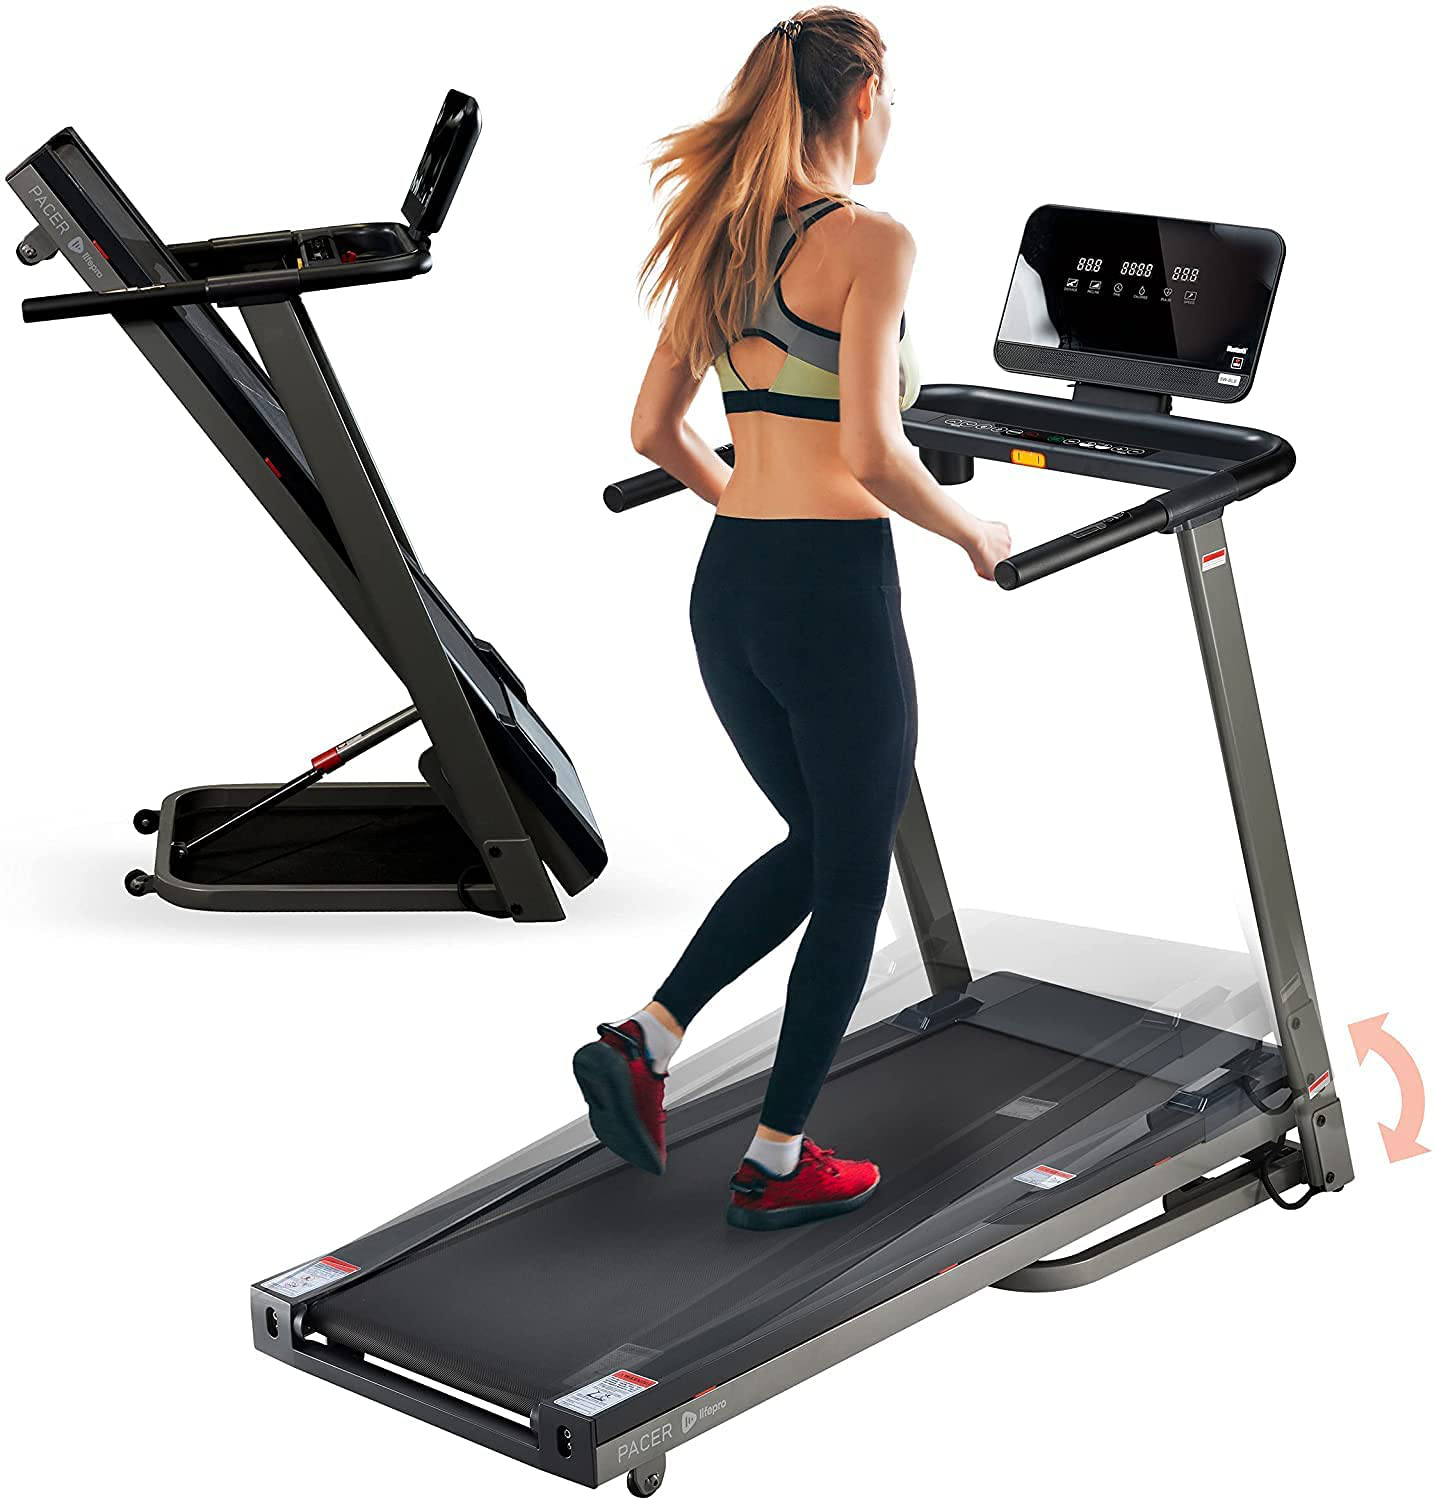 Lifepro Folding Treadmill for Home - Smart Motorized Portable Treadmill with Incline, Bluetooth Speakers & Modern Display - Easy Assembly Compact Walking Treadmill Incline for Cardio & Weight Loss Animals & Pet Supplies > Pet Supplies > Dog Supplies > Dog Treadmills LifePro   